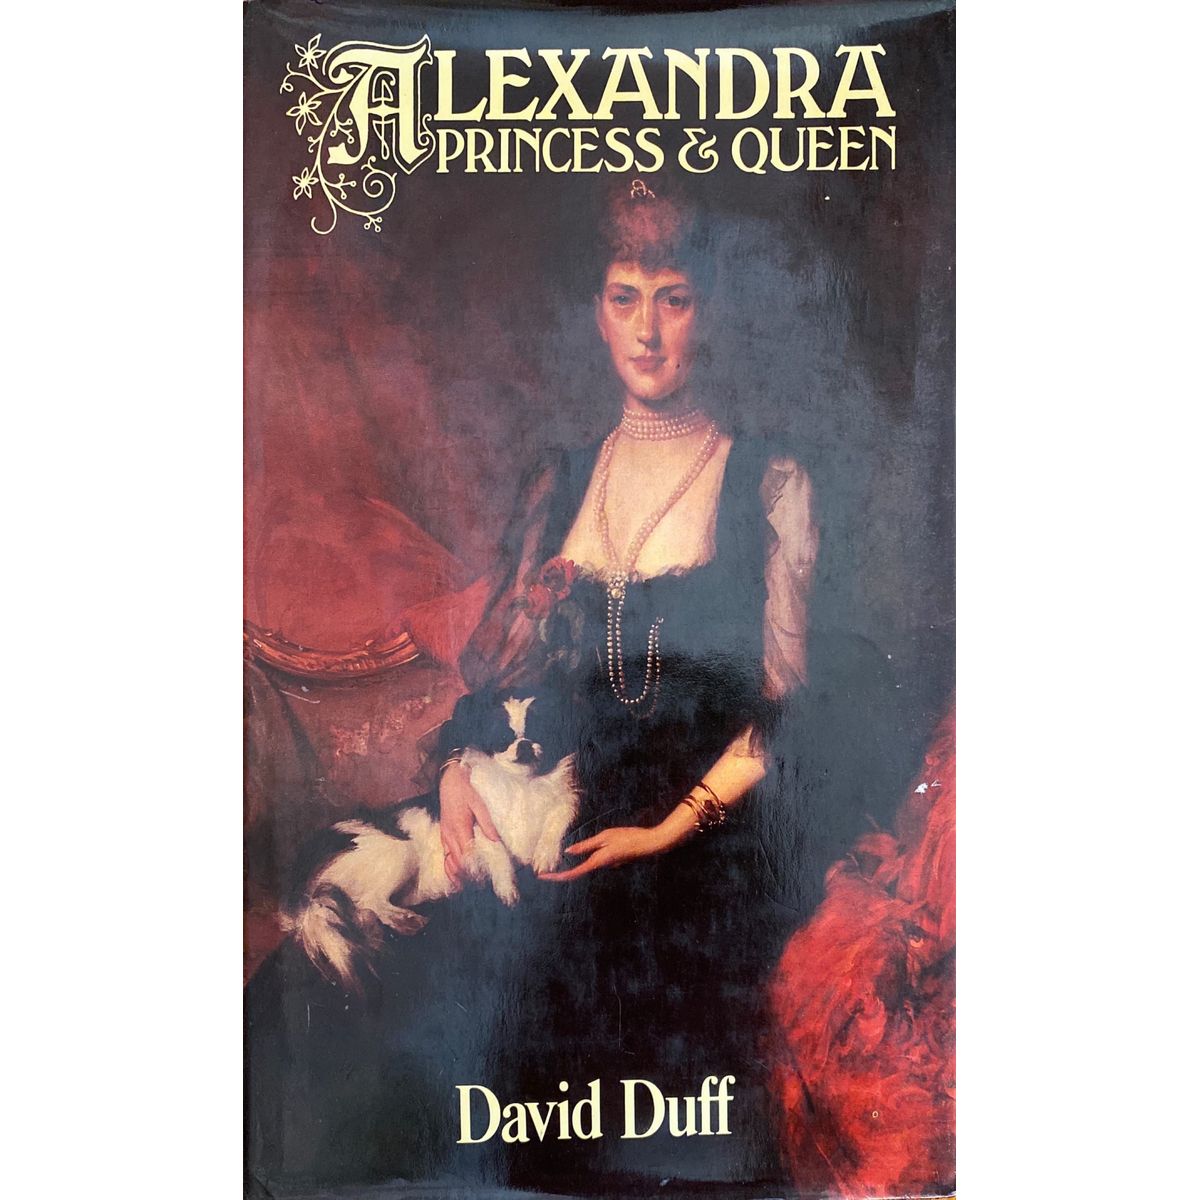 ISBN: 9780002166676 / 0002166674 - Alexandra Princess and Queen by David Duff, 1st Edition [1980]